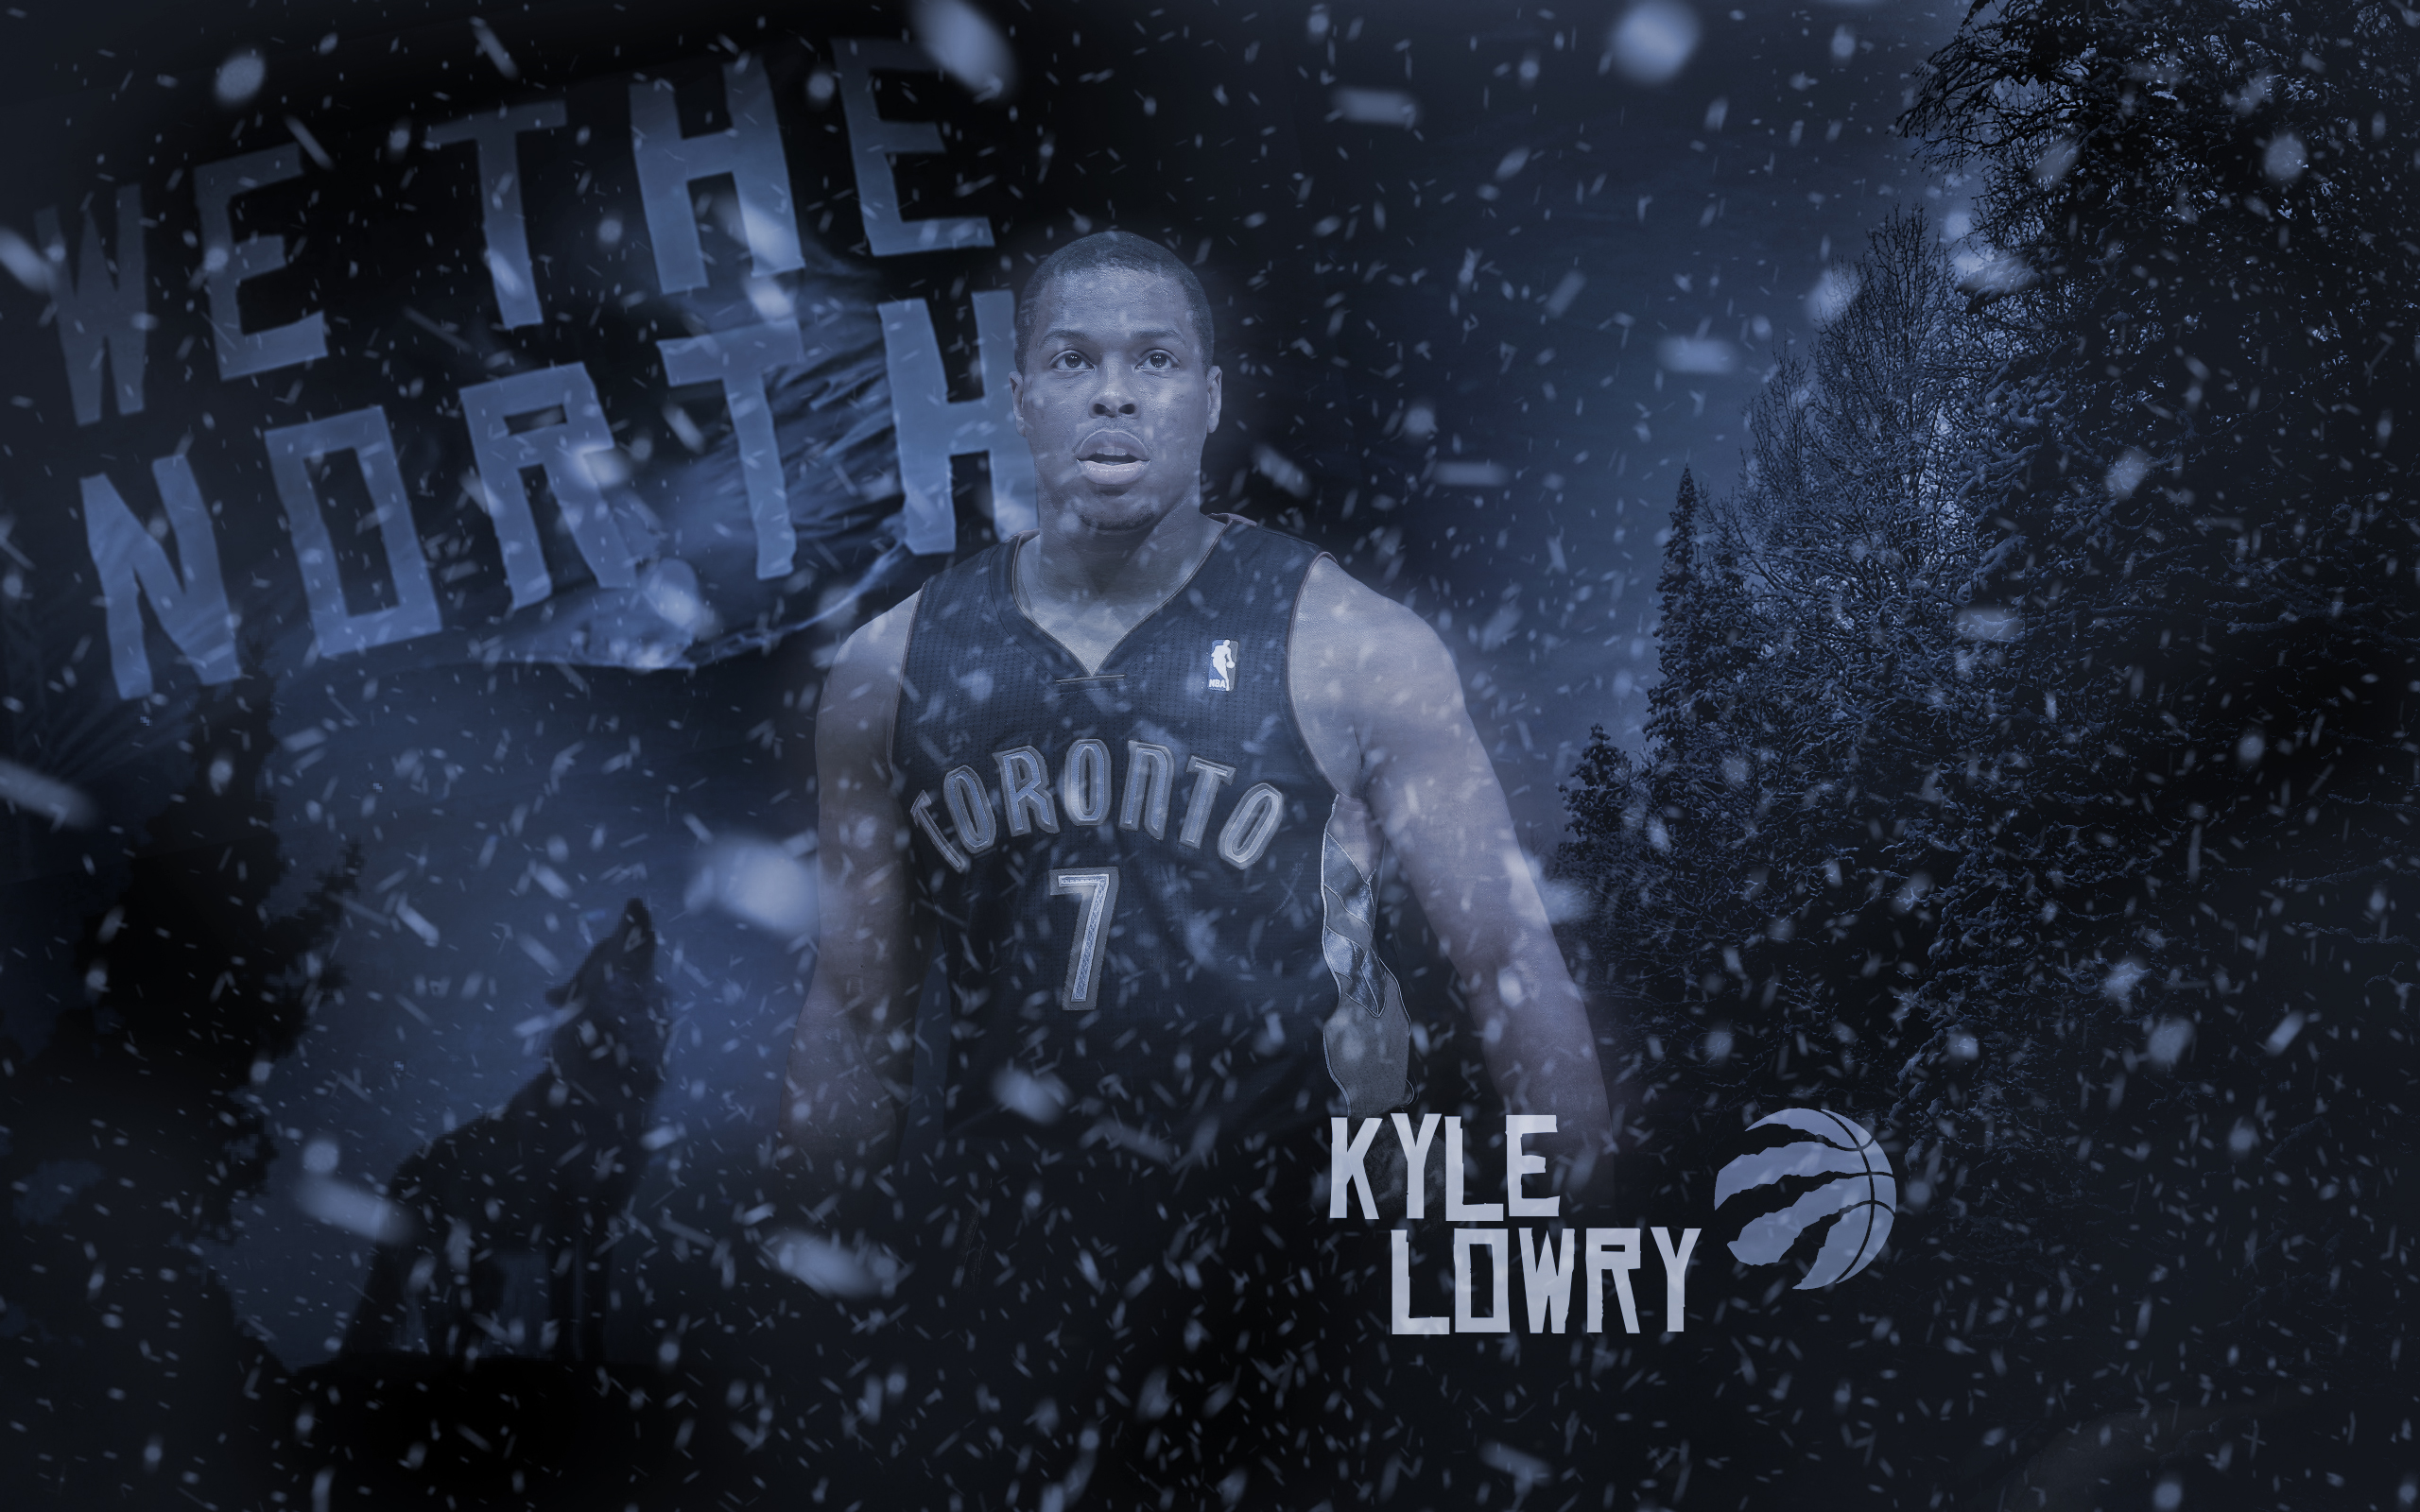 Kyle Lowry images 48 wallpapers   Qularicom 2560x1600